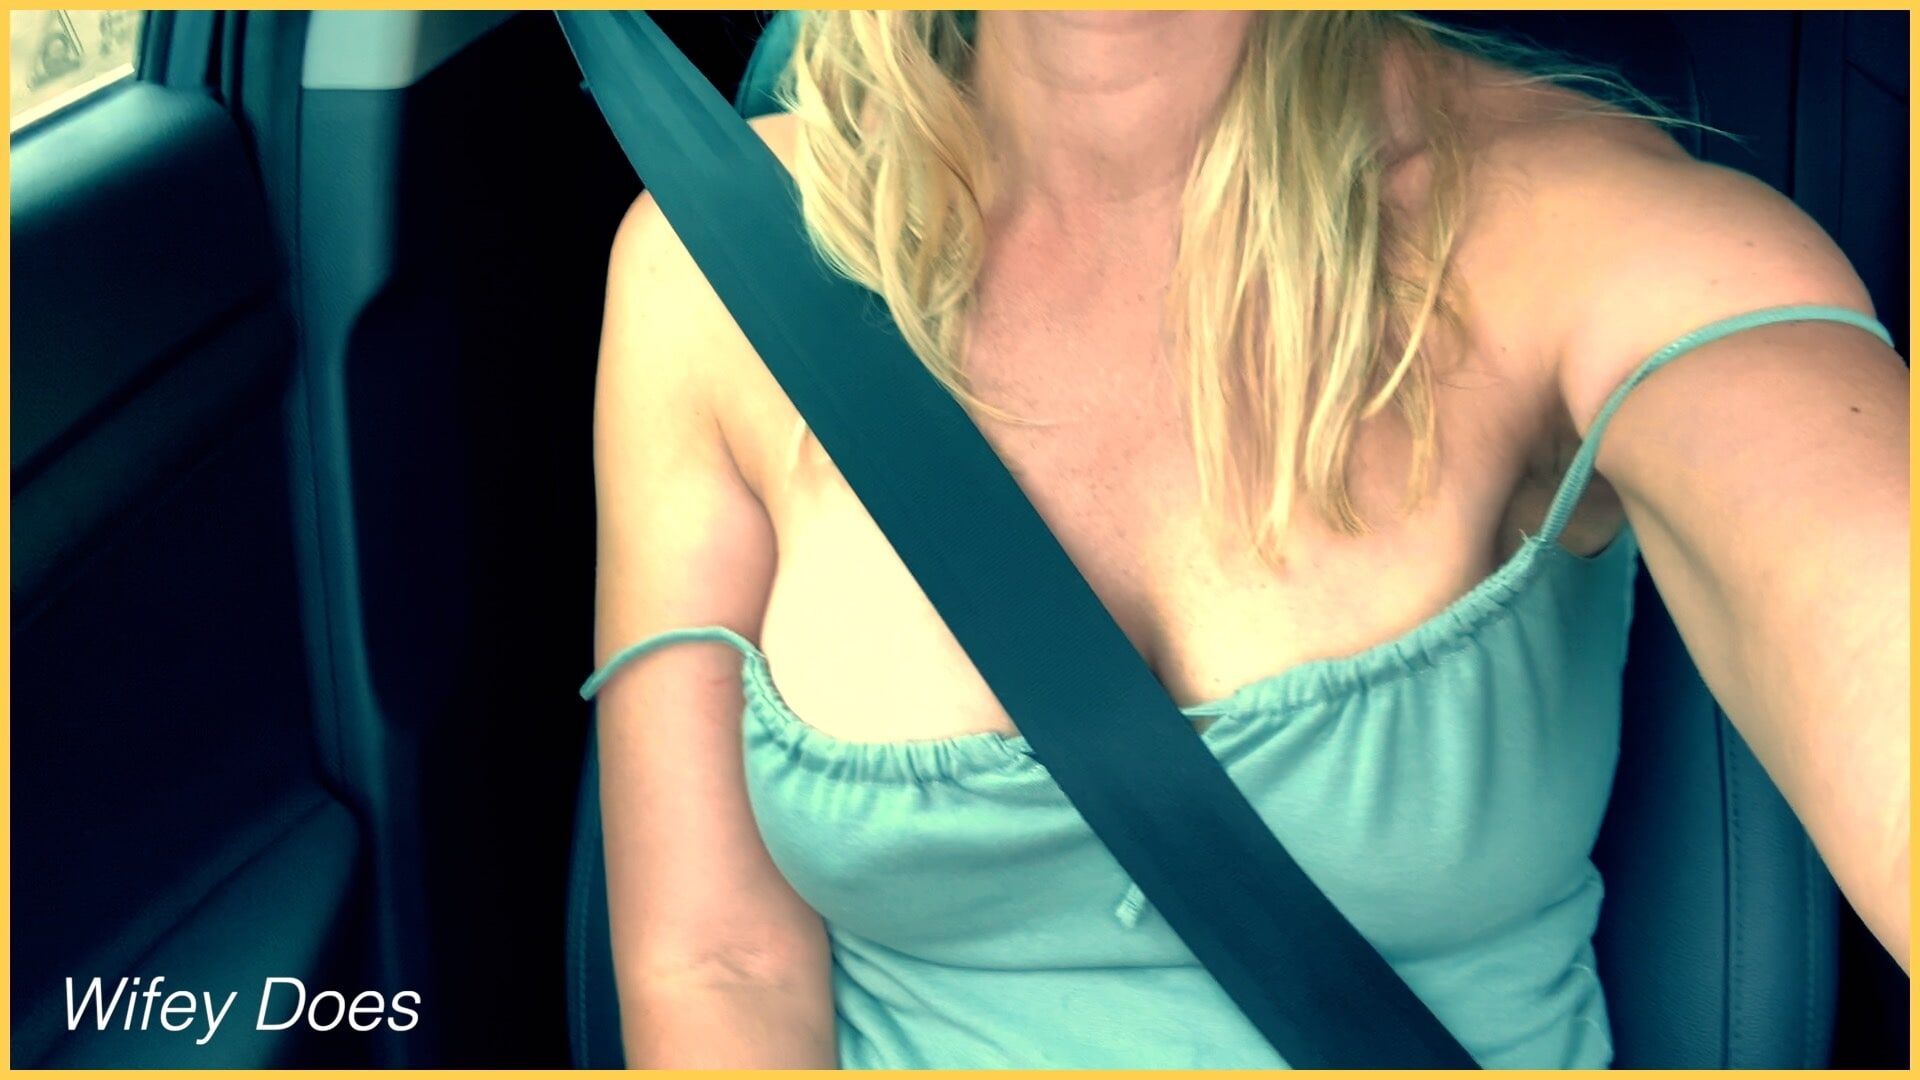 Wifey gets her tits bounced in the car #5